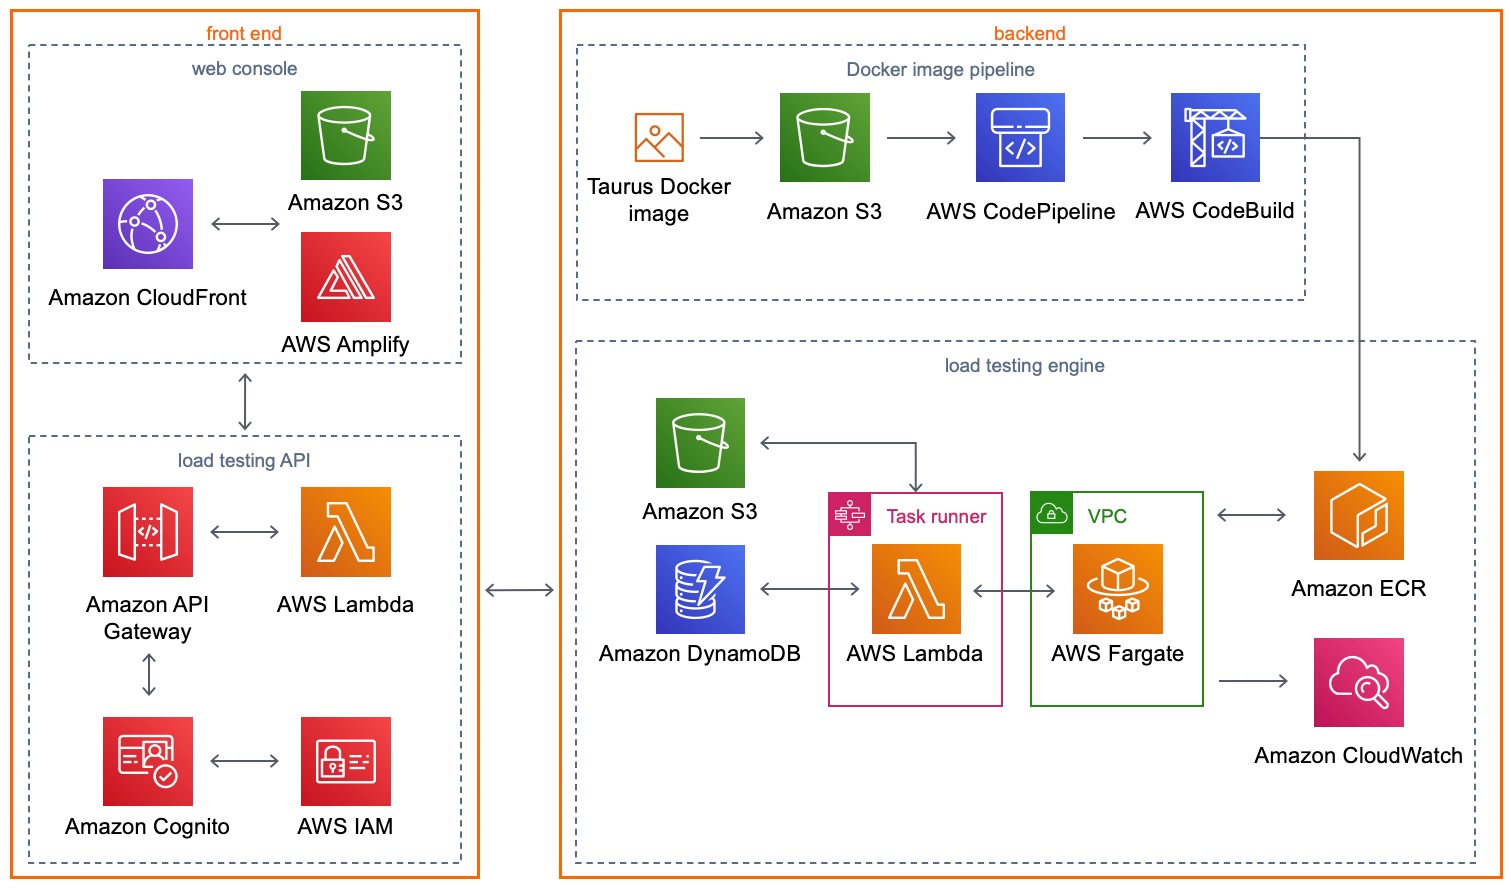 Distributed Load Testing by AWS